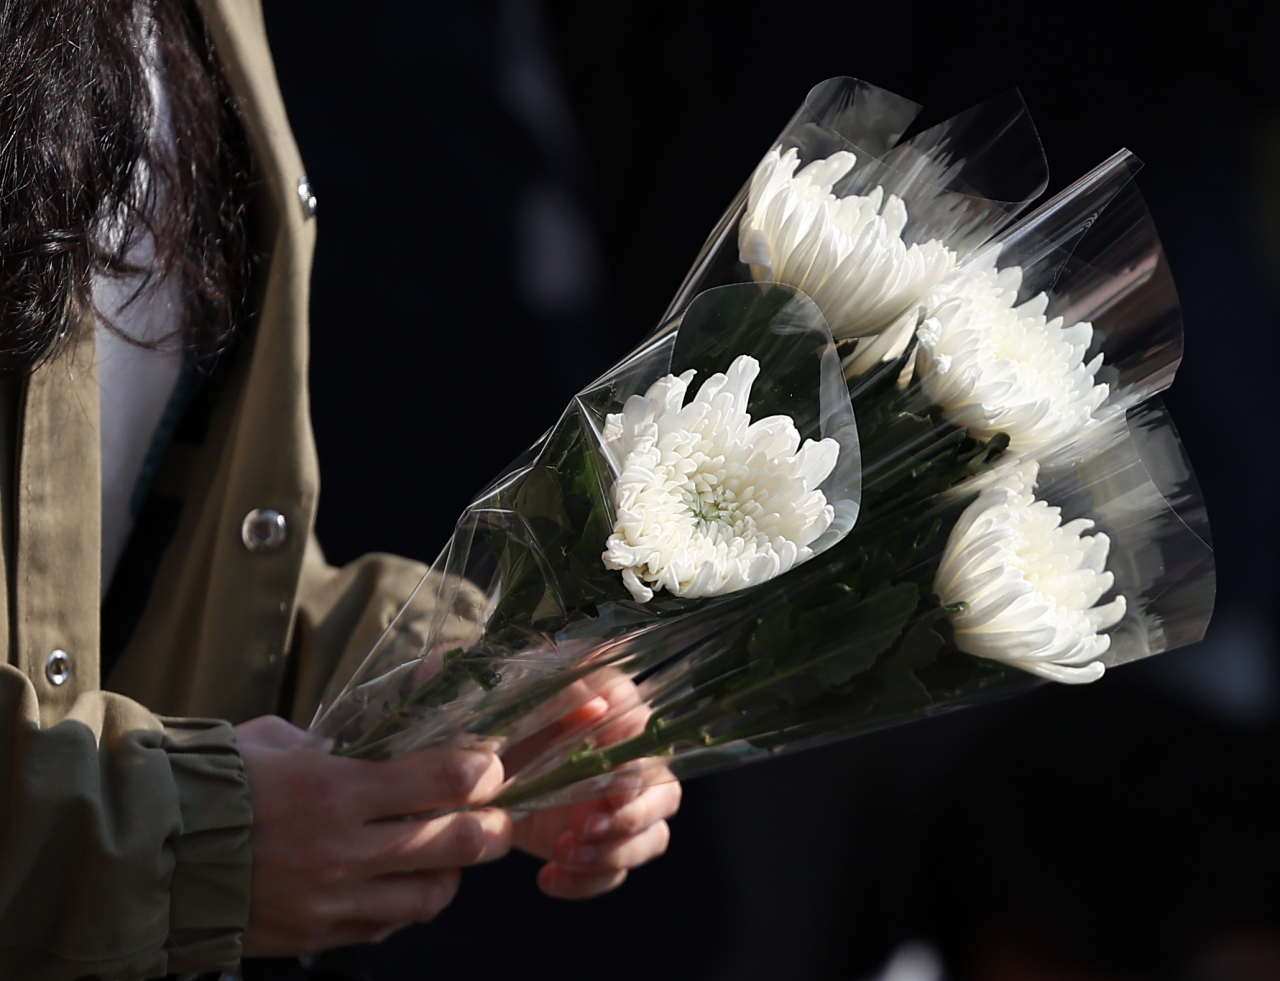 A mourner holds flowers that will be placed outside Itaewon subway station. (Yonhap)